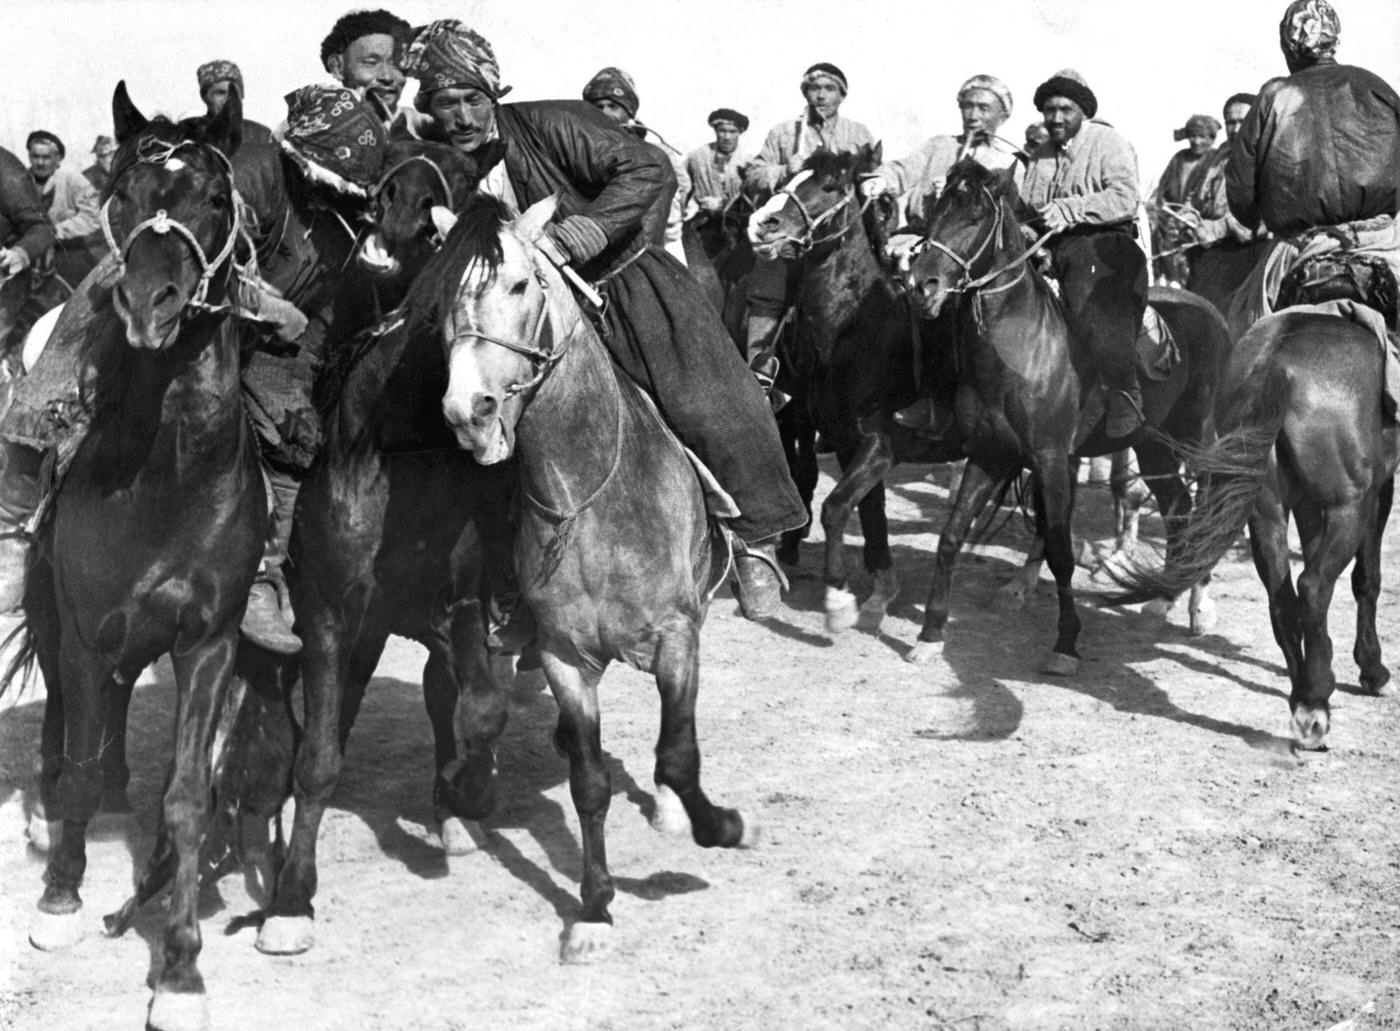 The Buzkashi Game in progress in Afghanistan, 1955.